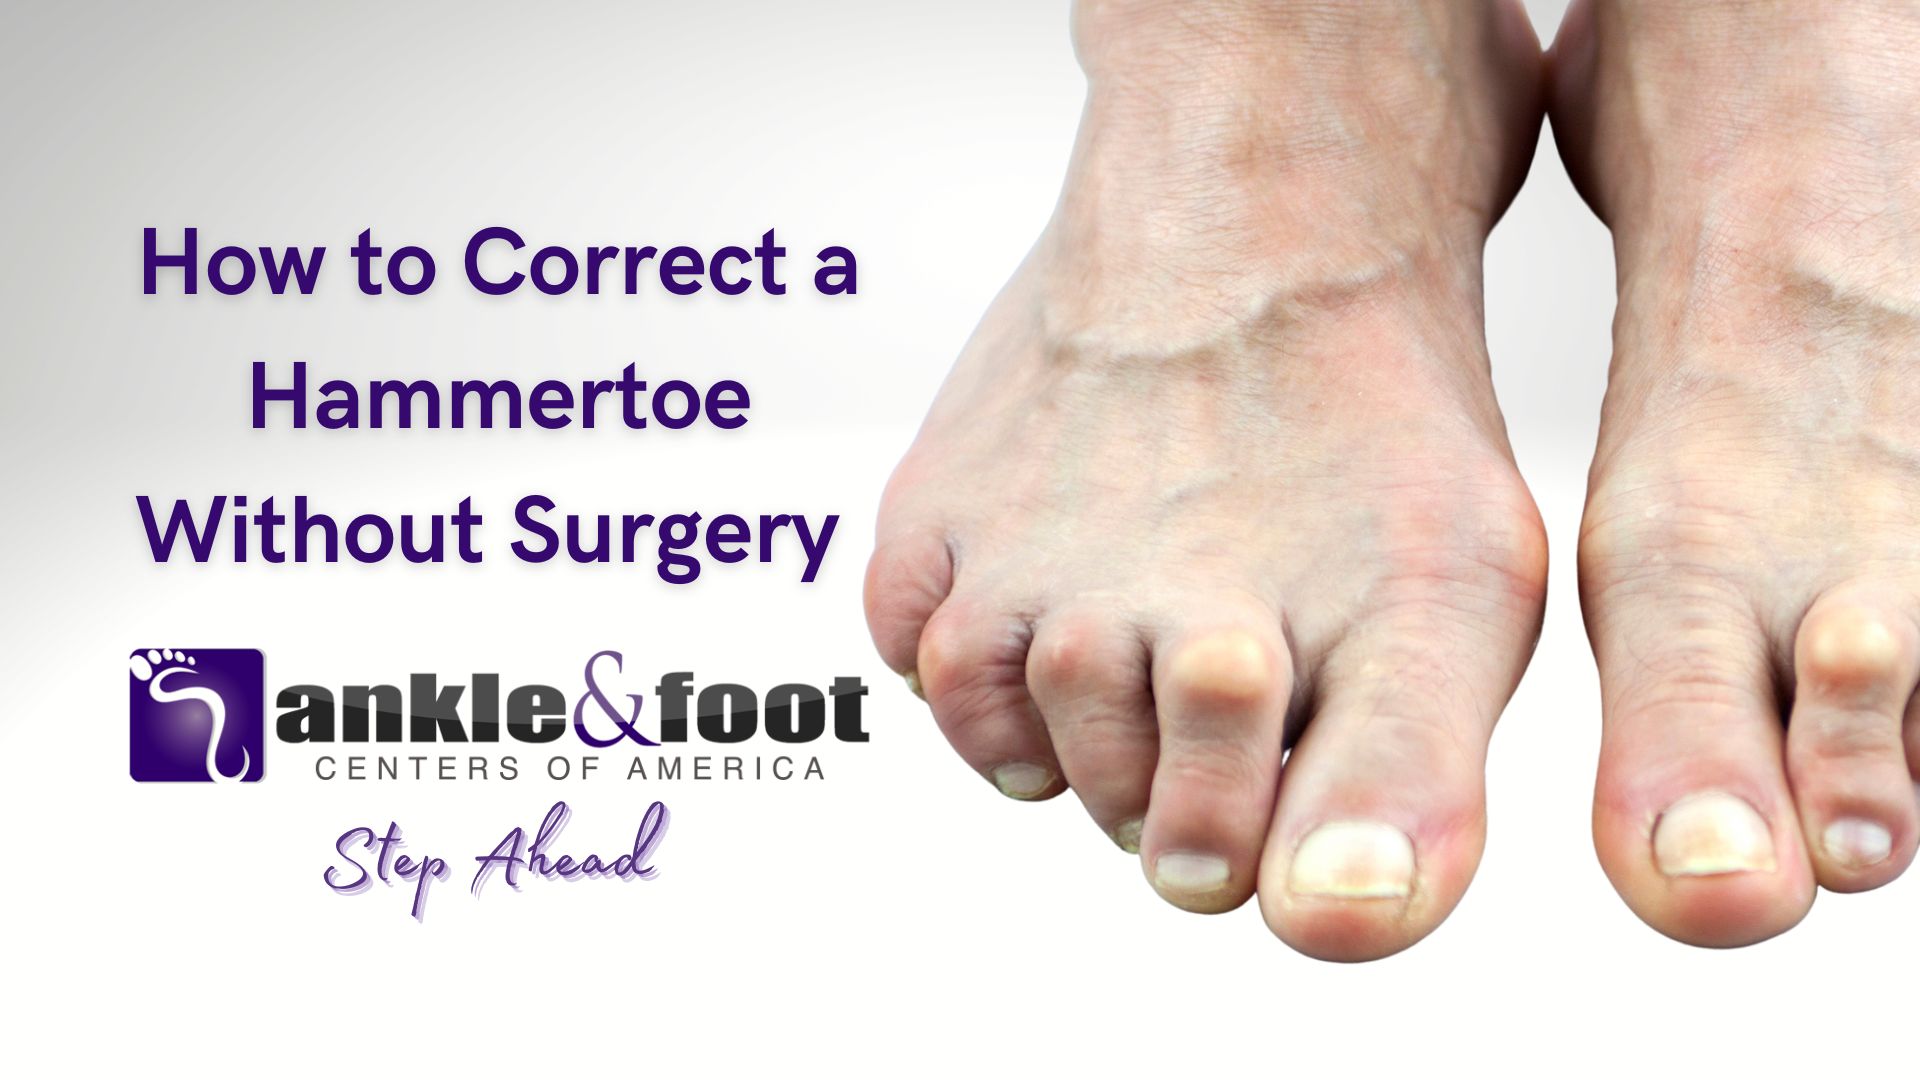 How To Correct a Hammertoe Without Surgery